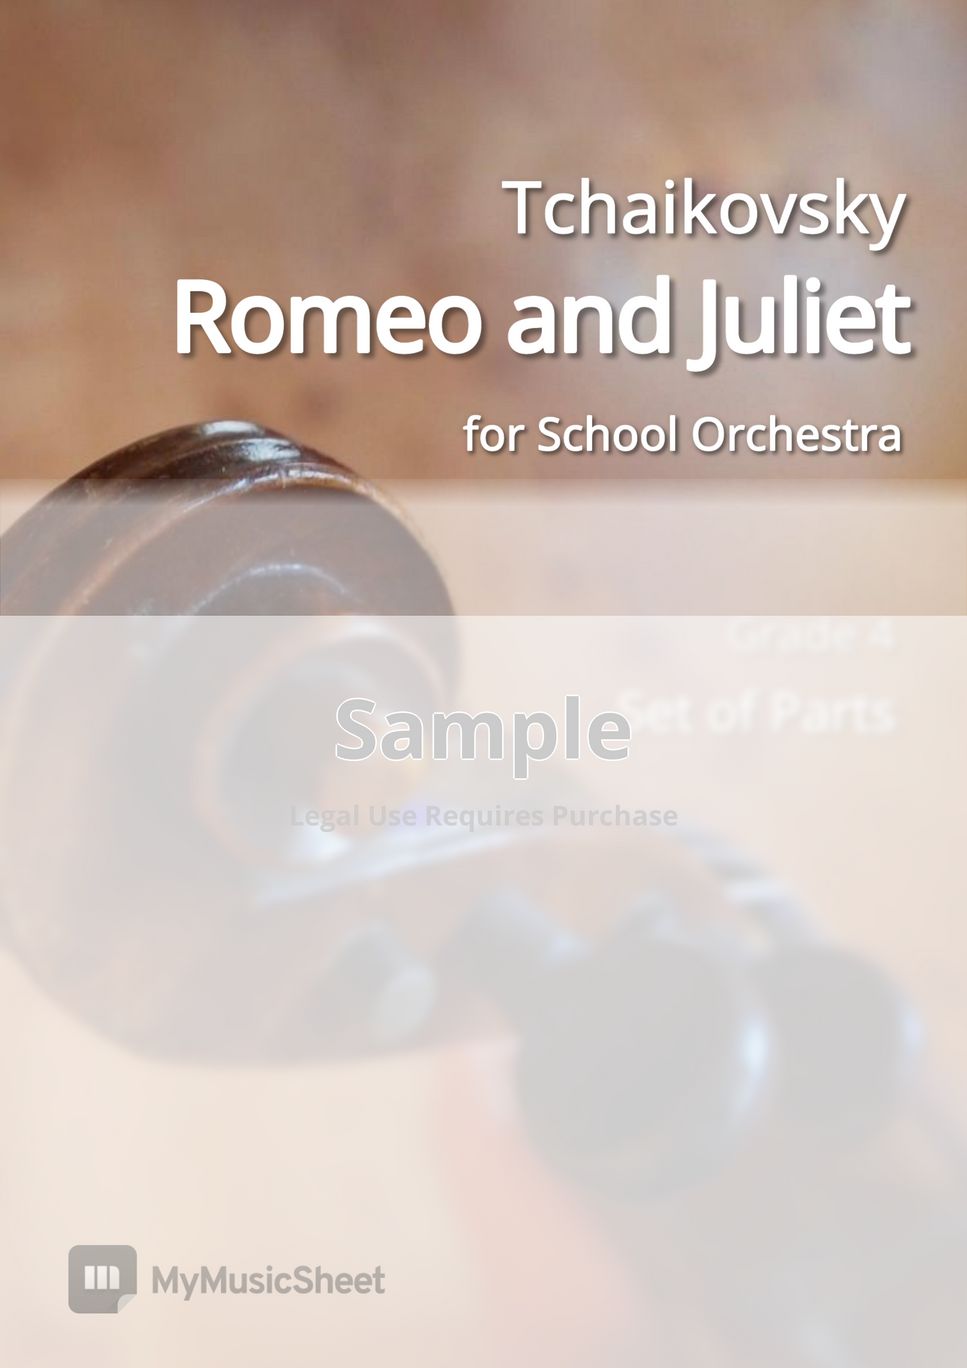 Tchaikovsky - Romeo and Juliet Fantasy Overture for School Orchestra (Parts) by Youngsuk Kim